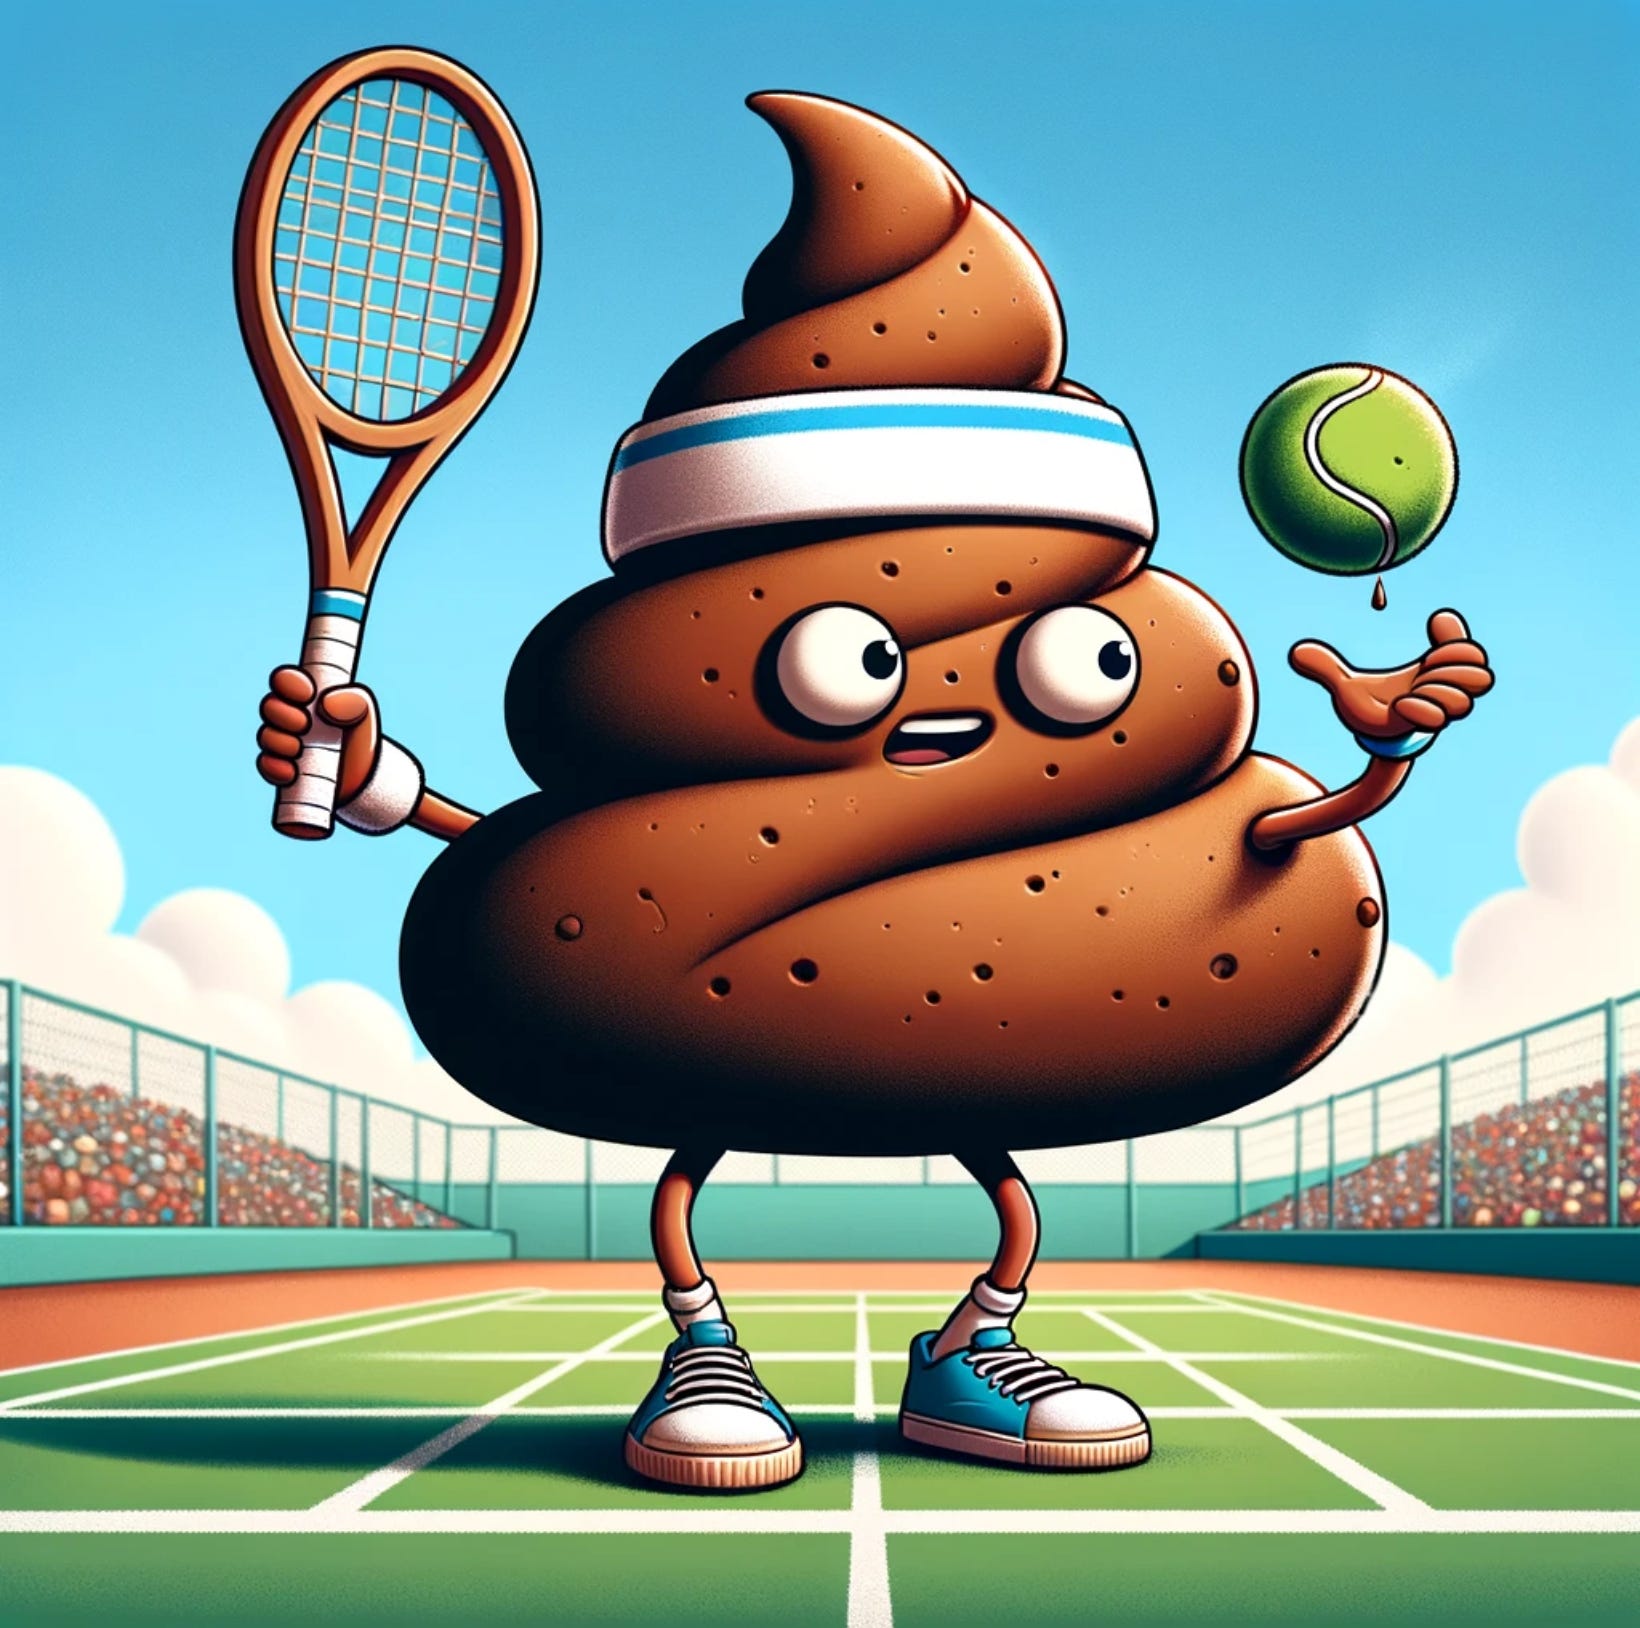 Poop #119. Meet Roger Fecalerer the poop prodigy with a stinky serve that wins matches!